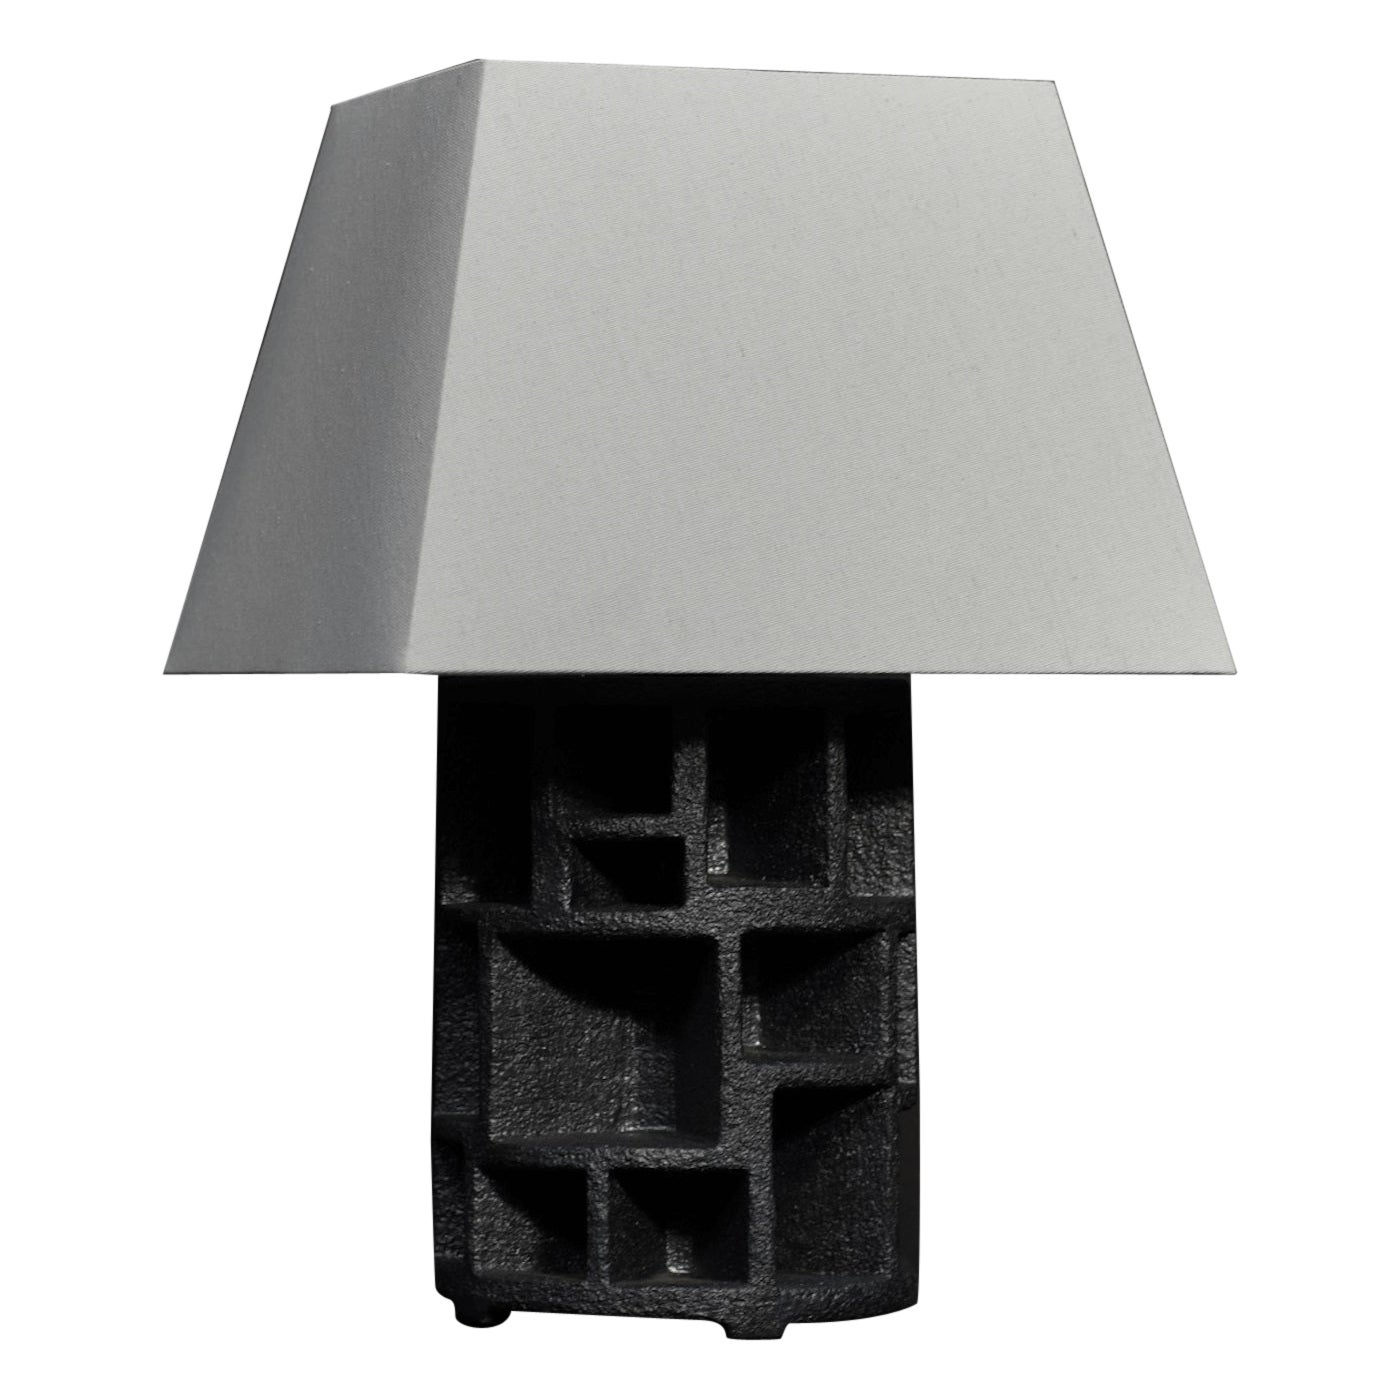 Textured Sculptural Ceramic Table Lamp, Charcoal For Sale